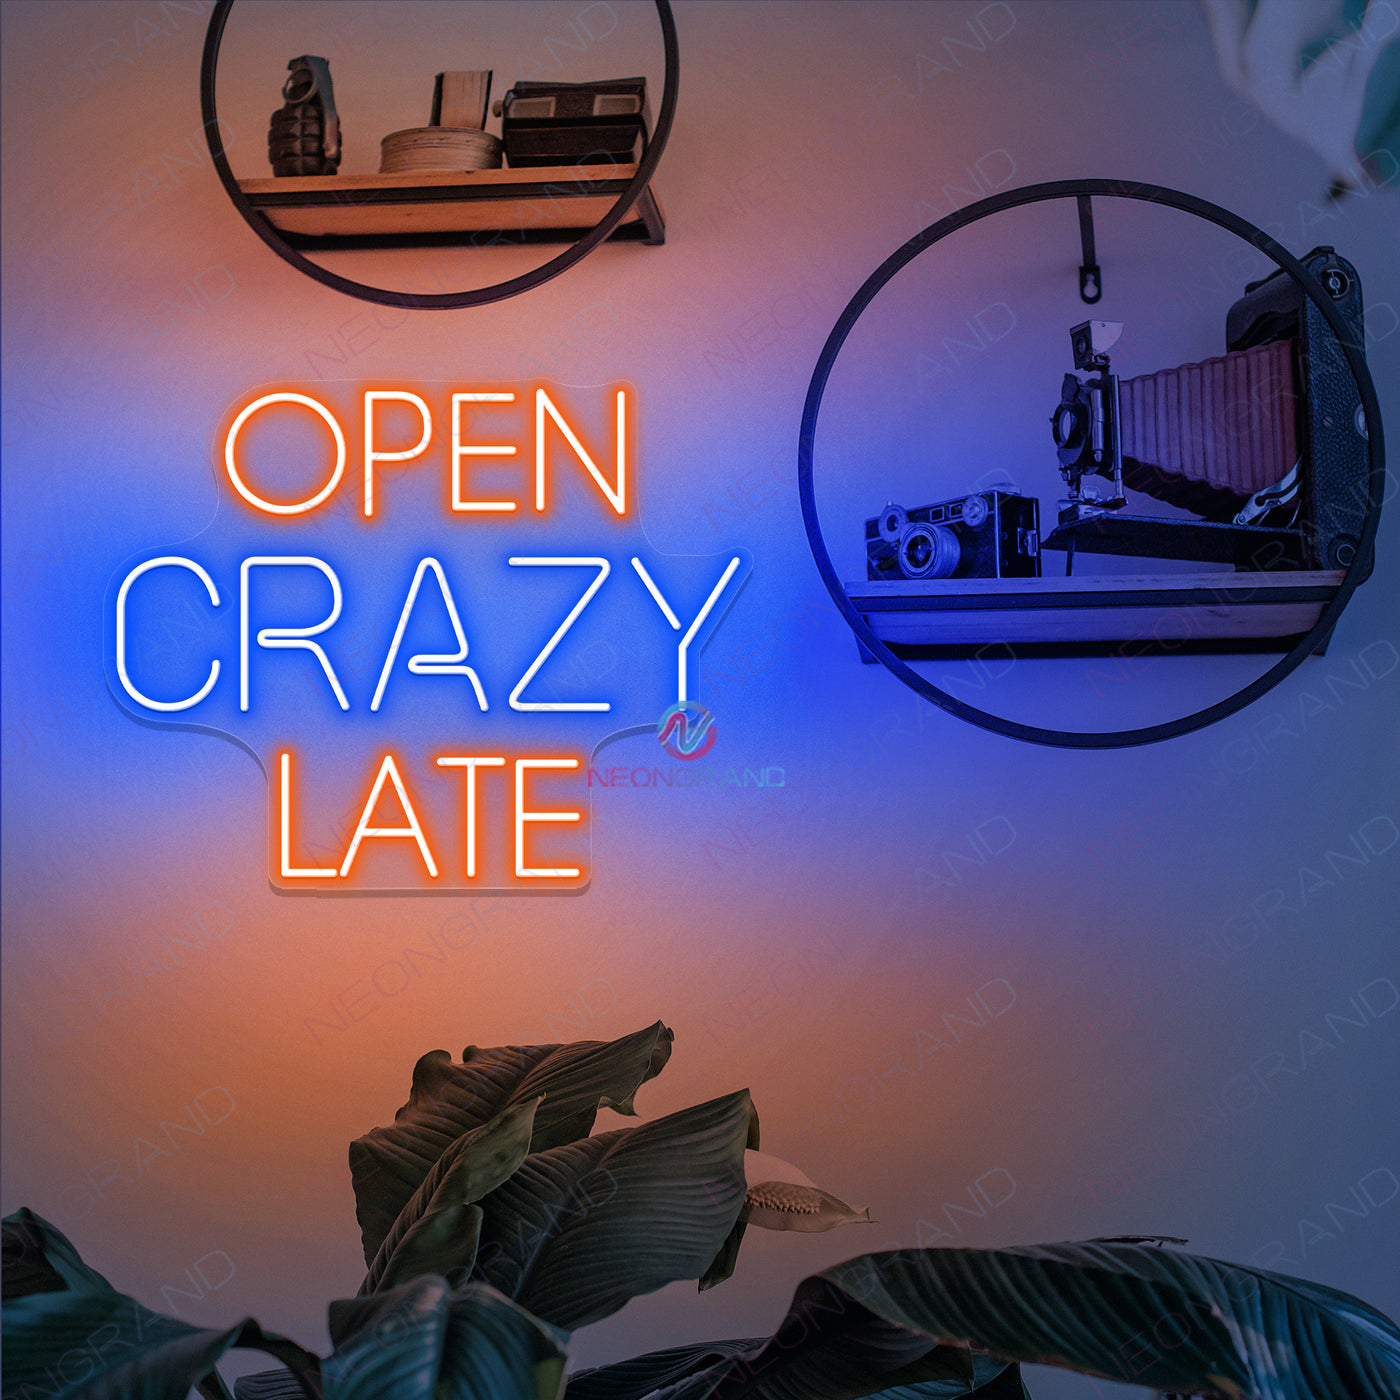 Open Crazy Late Neon Sign Business Led Light